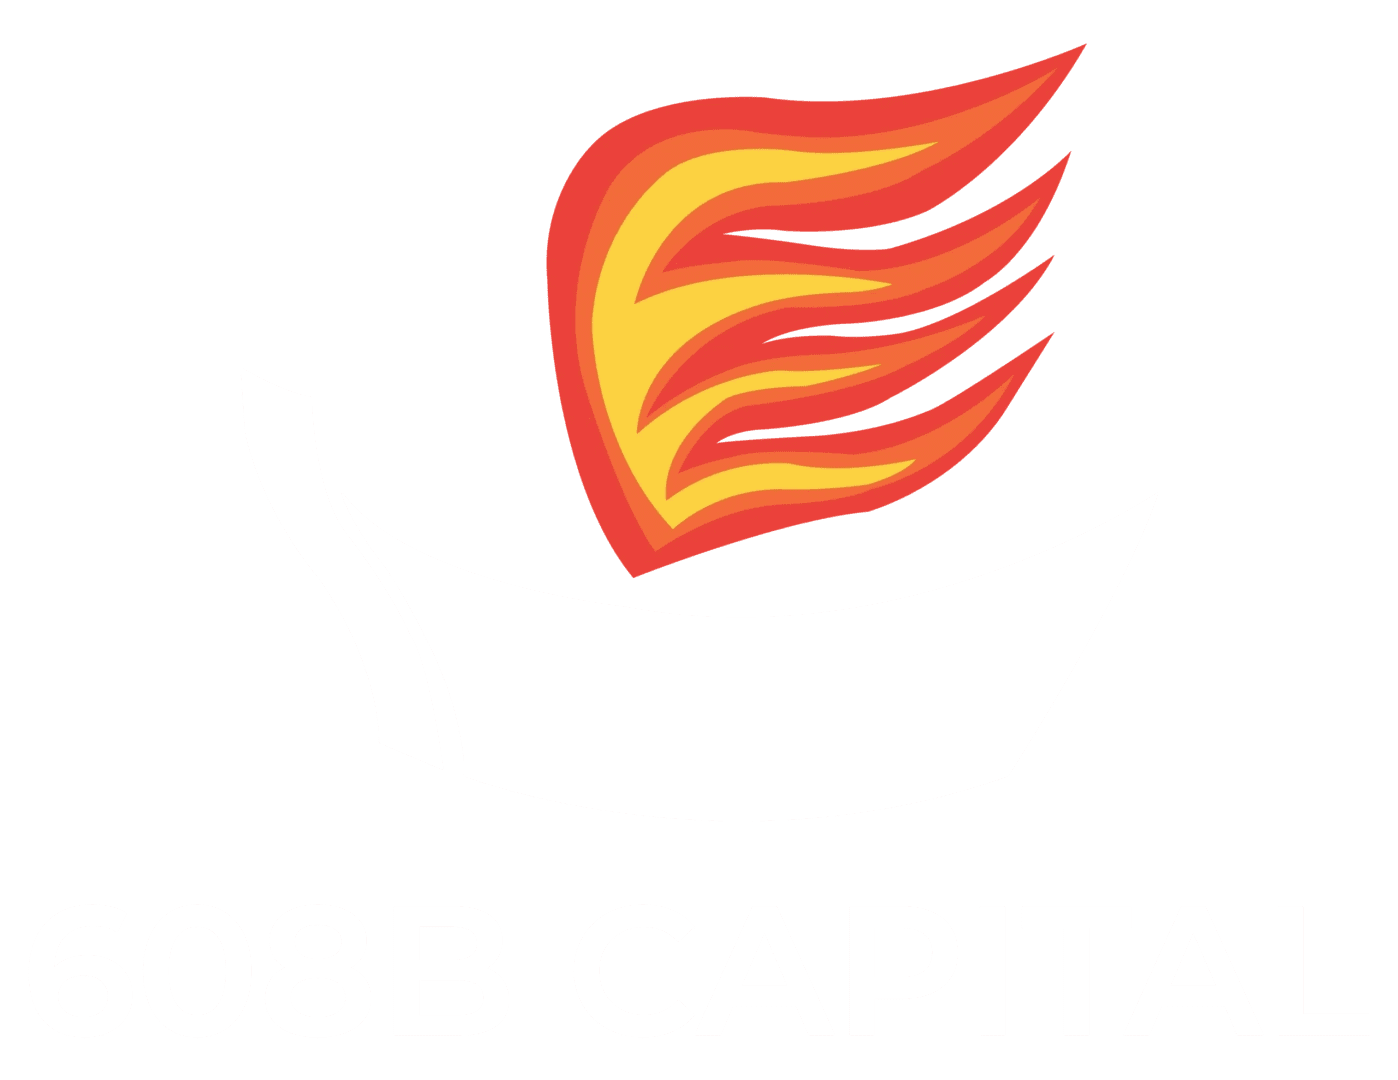 A picture of the logo for 0 8 b capital.